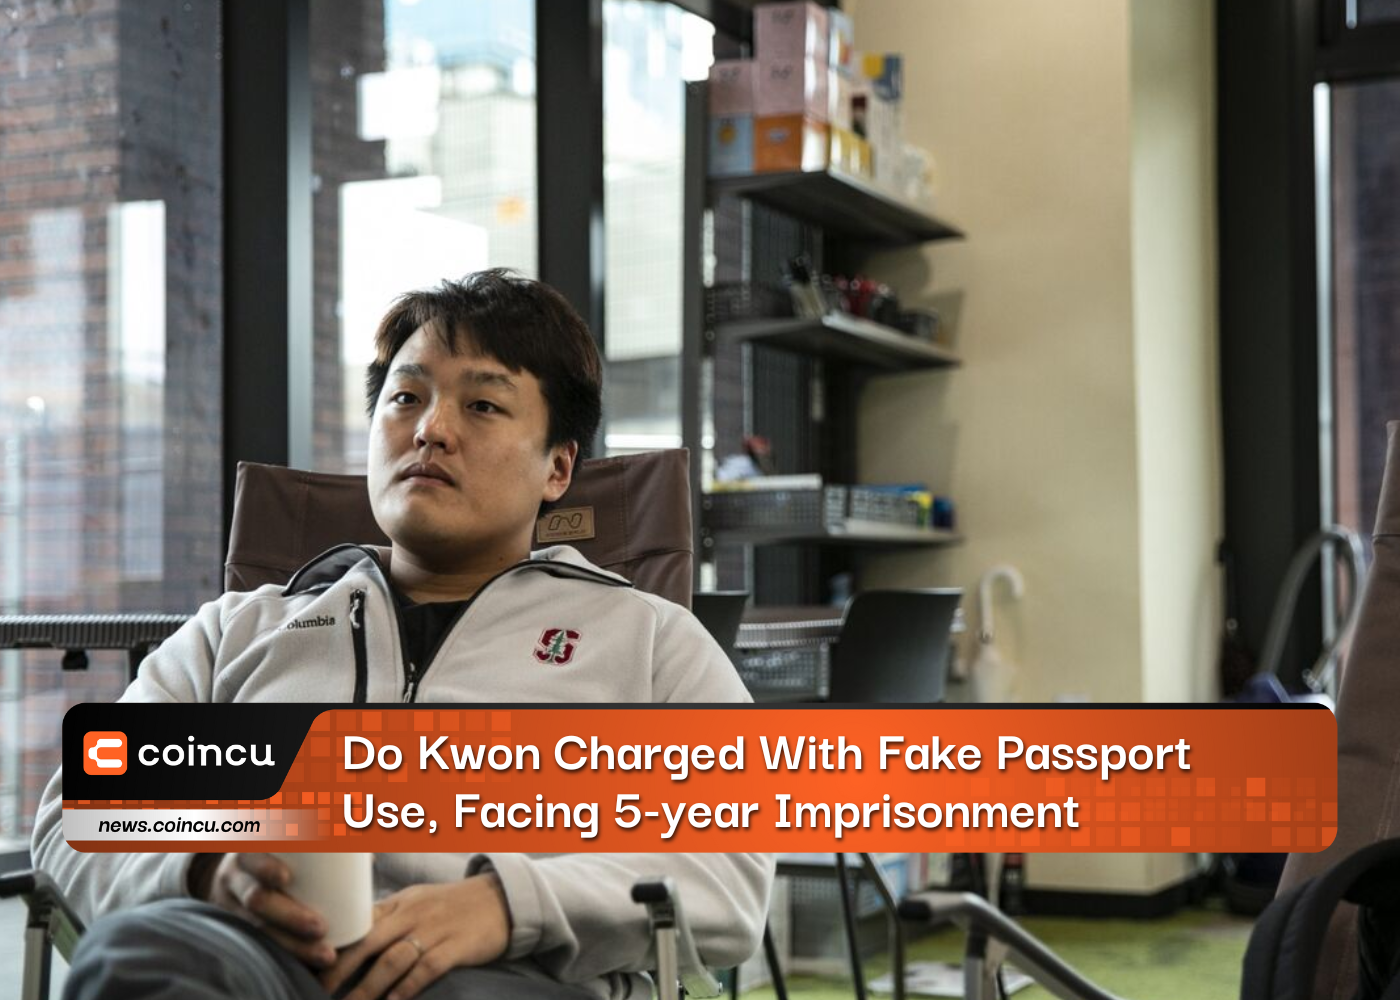 Do Kwon Charged With Fake Passport Use, Facing 5-year Imprisonment